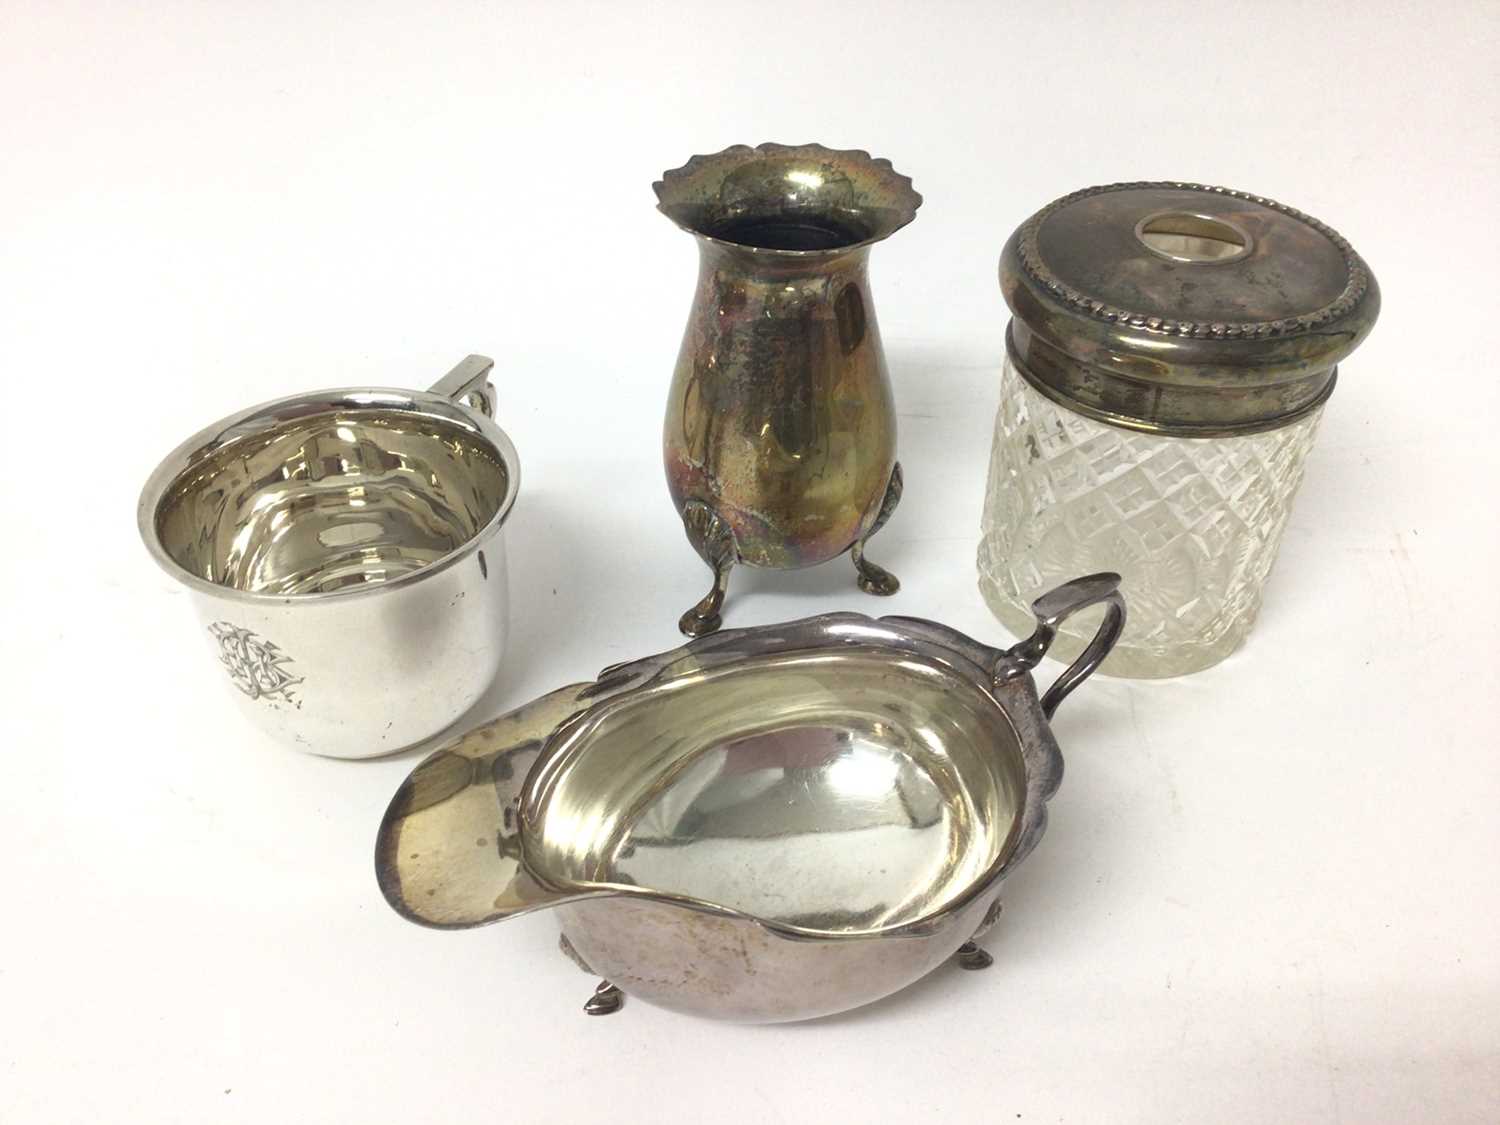 Lot 136 - 1920s silver tea cup with engraved monogram, silver sauce boat, silver vase raised on three legs and silver topped glass jar